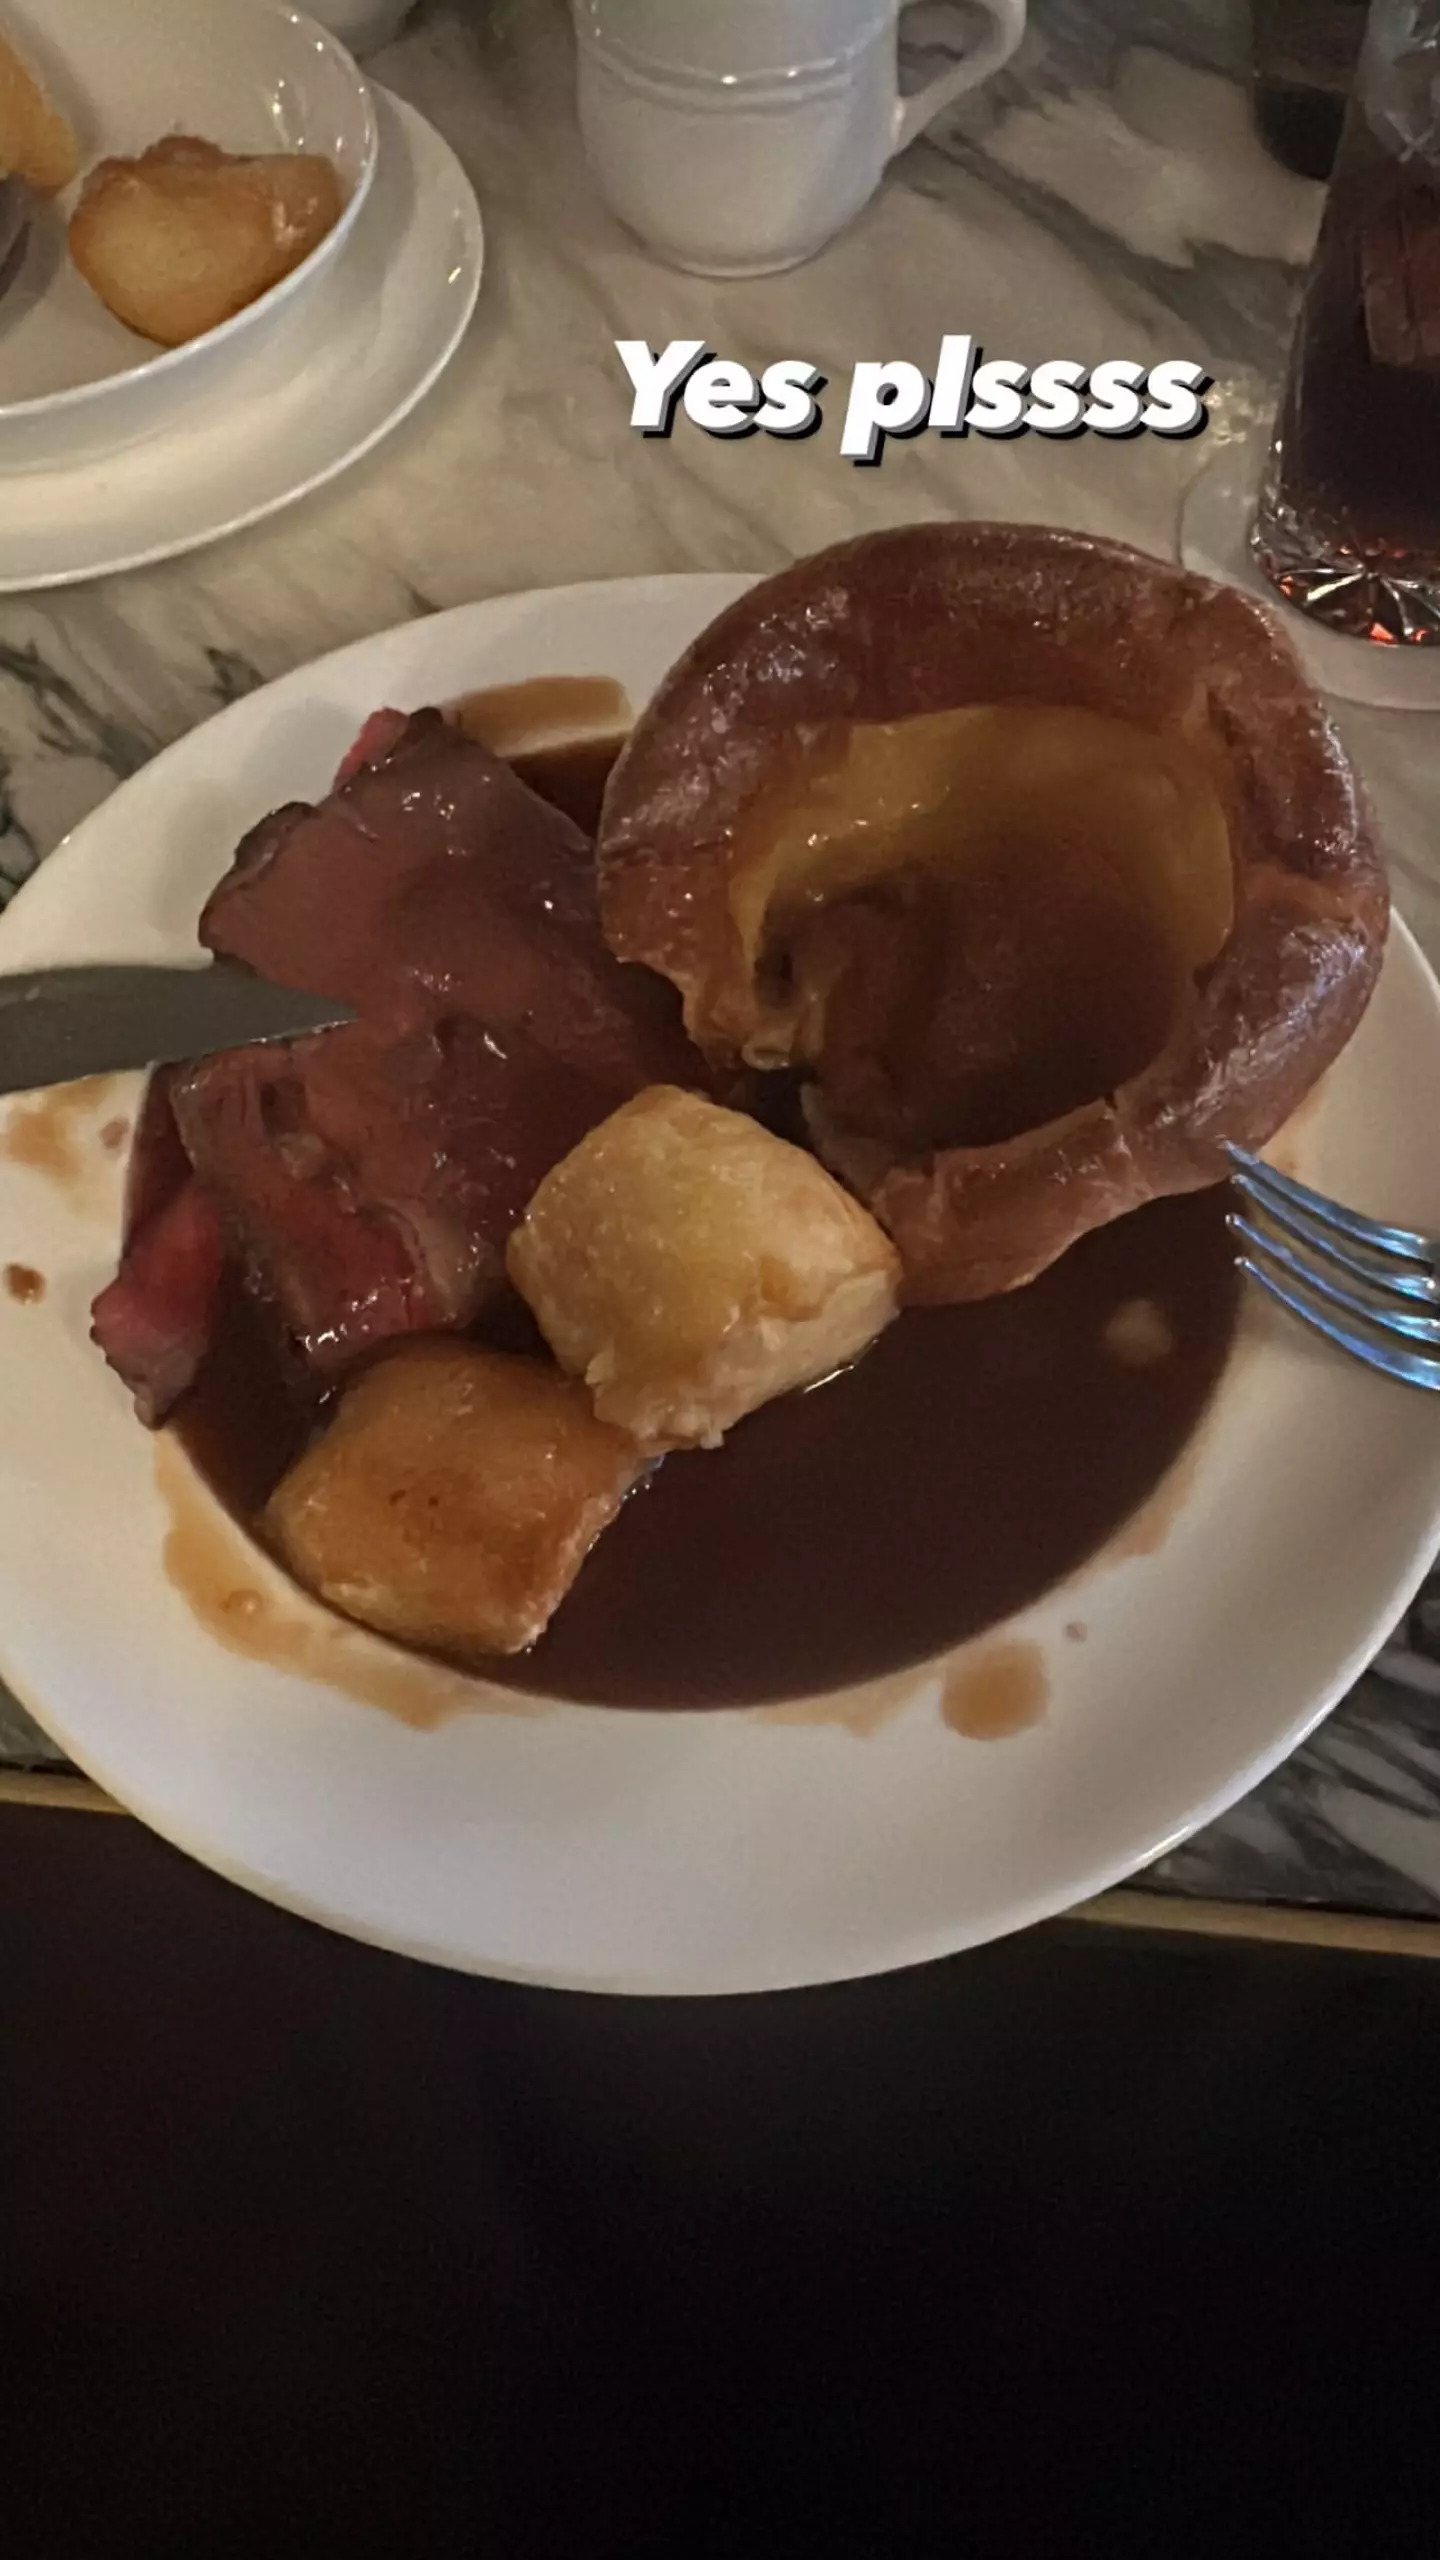 Brentford B star Romeo Beckham did not impress fans with his controversial roast dinner photo.